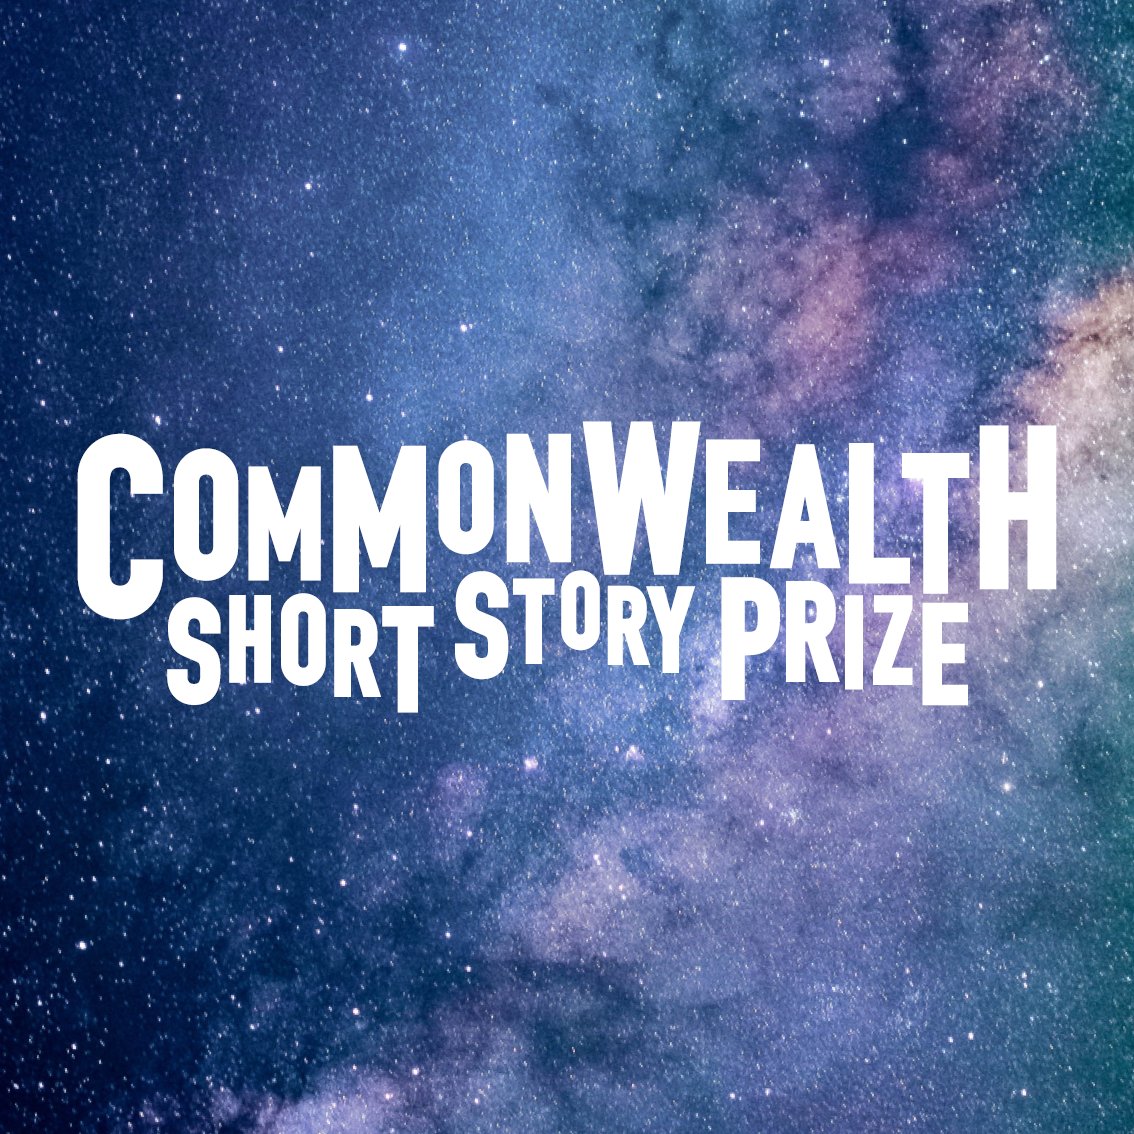 Due to a technical issue, updates on submissions to the Commonwealth Short Story Prize have been delayed for some entrants. We are working to resolve this and will ensure that all entrants receive an update in due course. Thank you! #CWprize